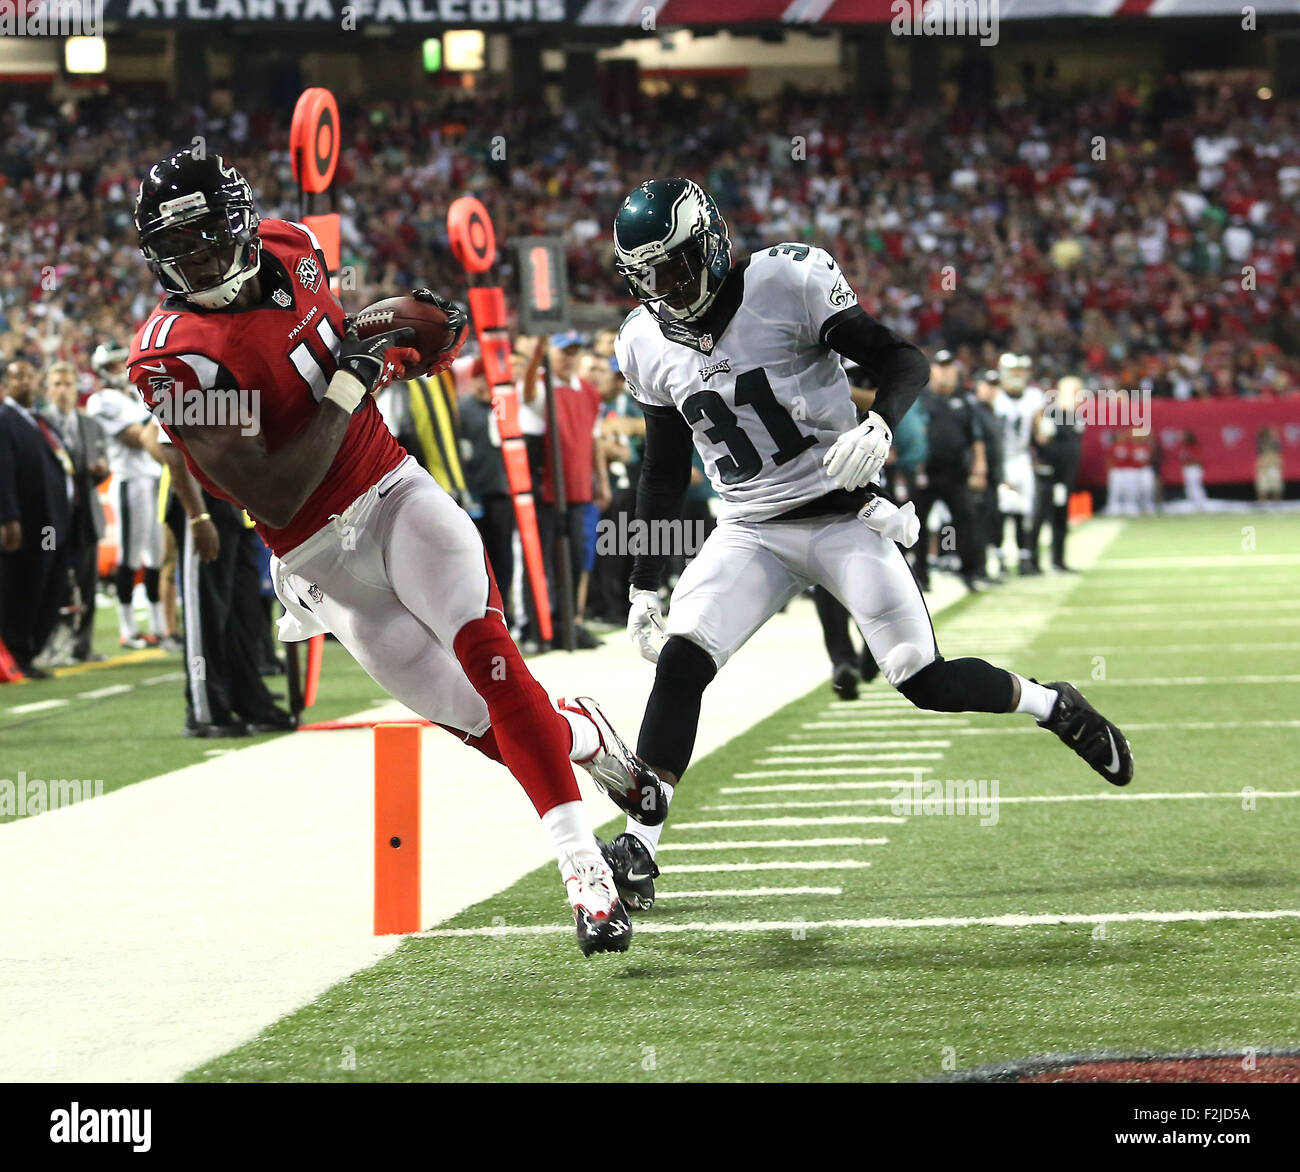 September 14, 2015: #11 Julio Jones of the Atlanta Falcons in action during NFL Monday Night Football game between Philadelphia Eagles and Atlanta Falcons in the Georgia Dome in Atlanta Georgia. The Atlanta Falcons won the game 26-24. Butch Liddell/CSM Stock Photo